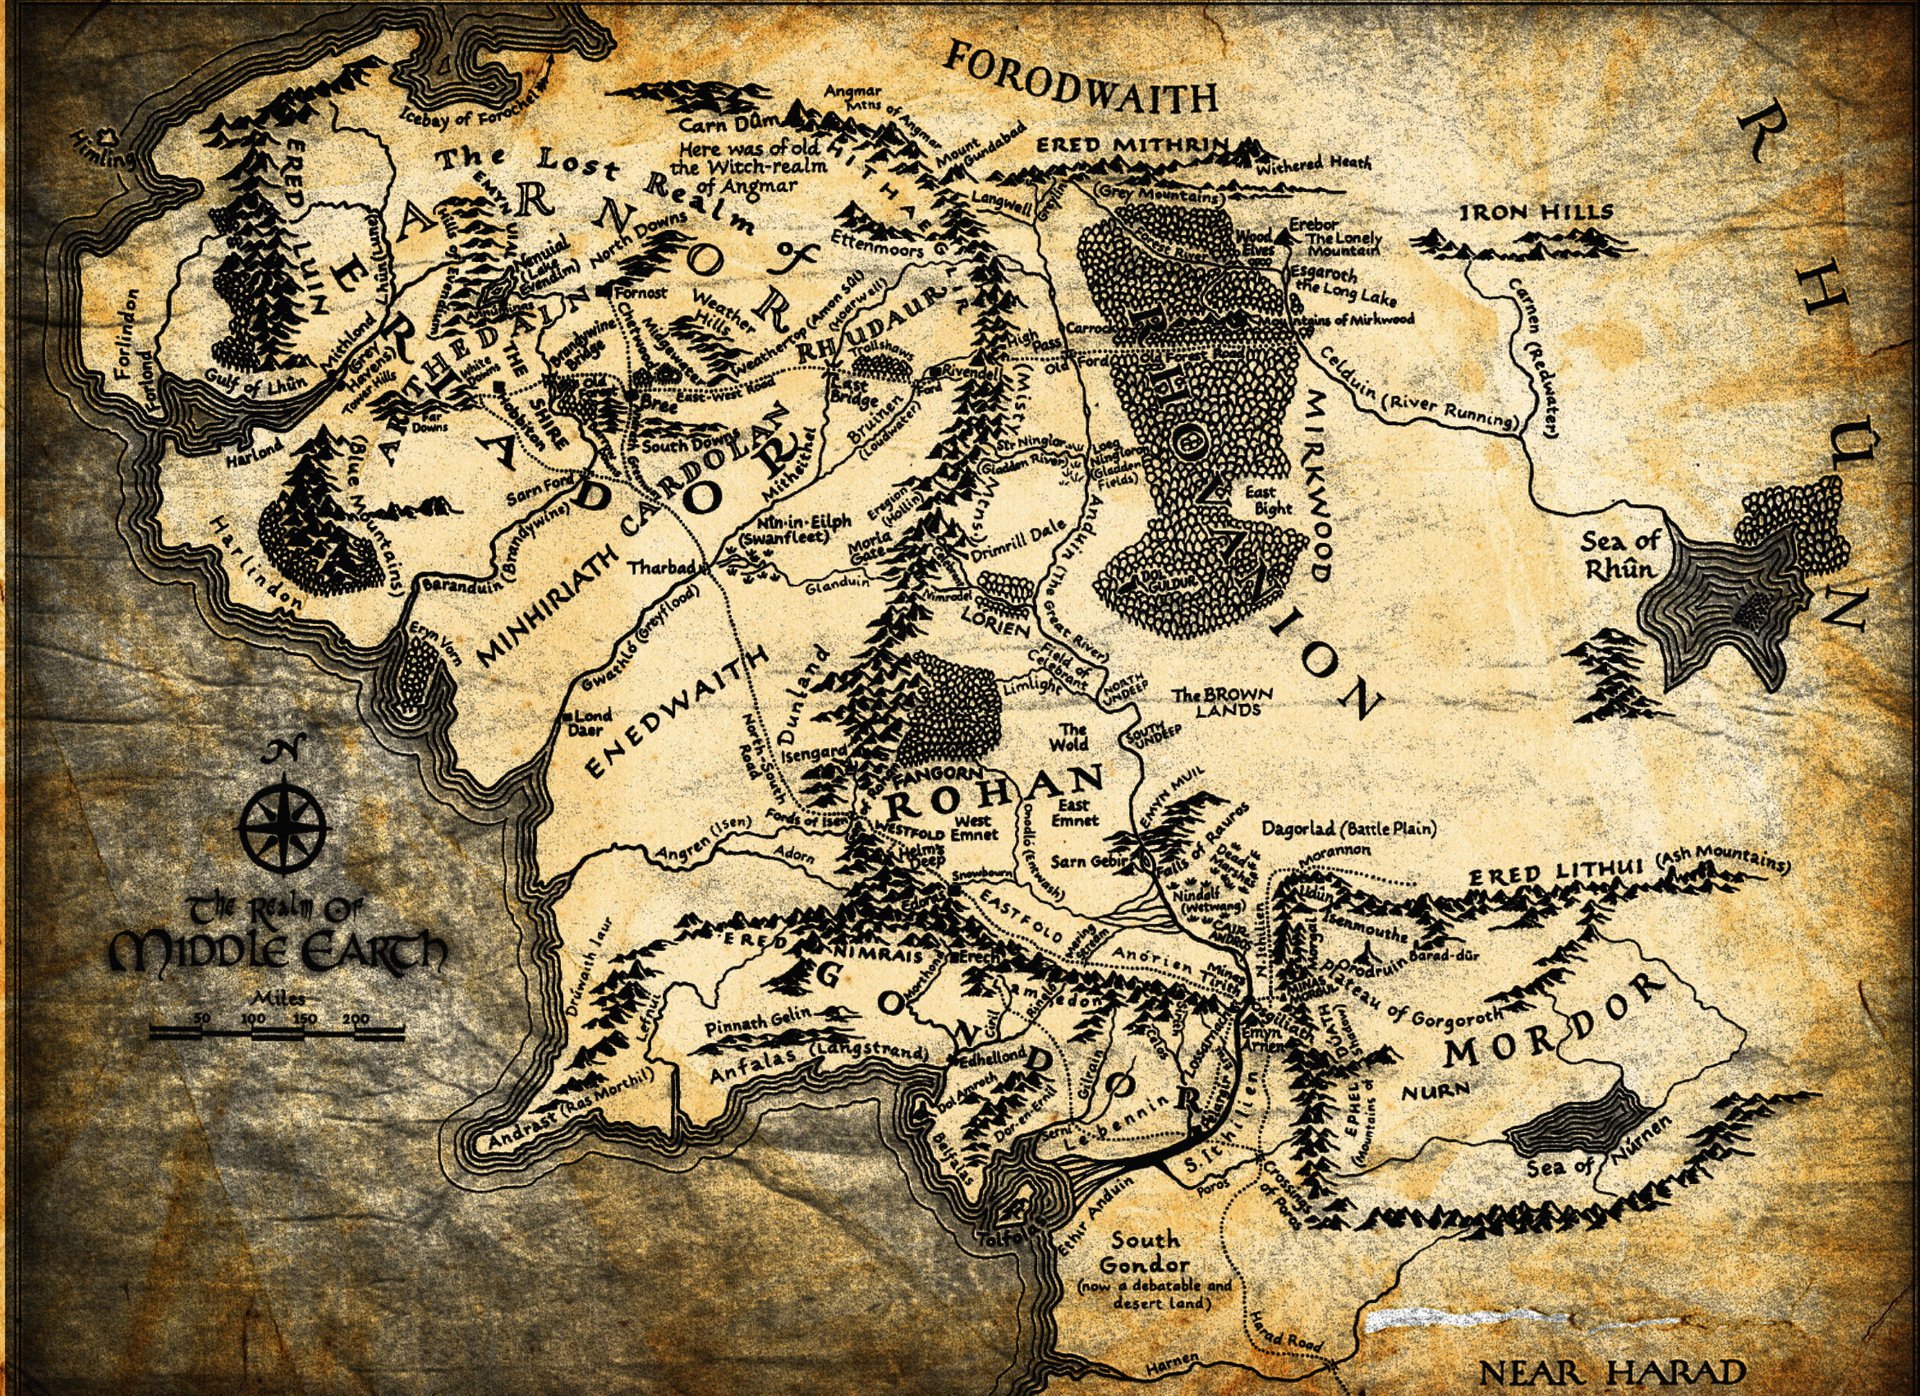 A map from the Lord of the Rings